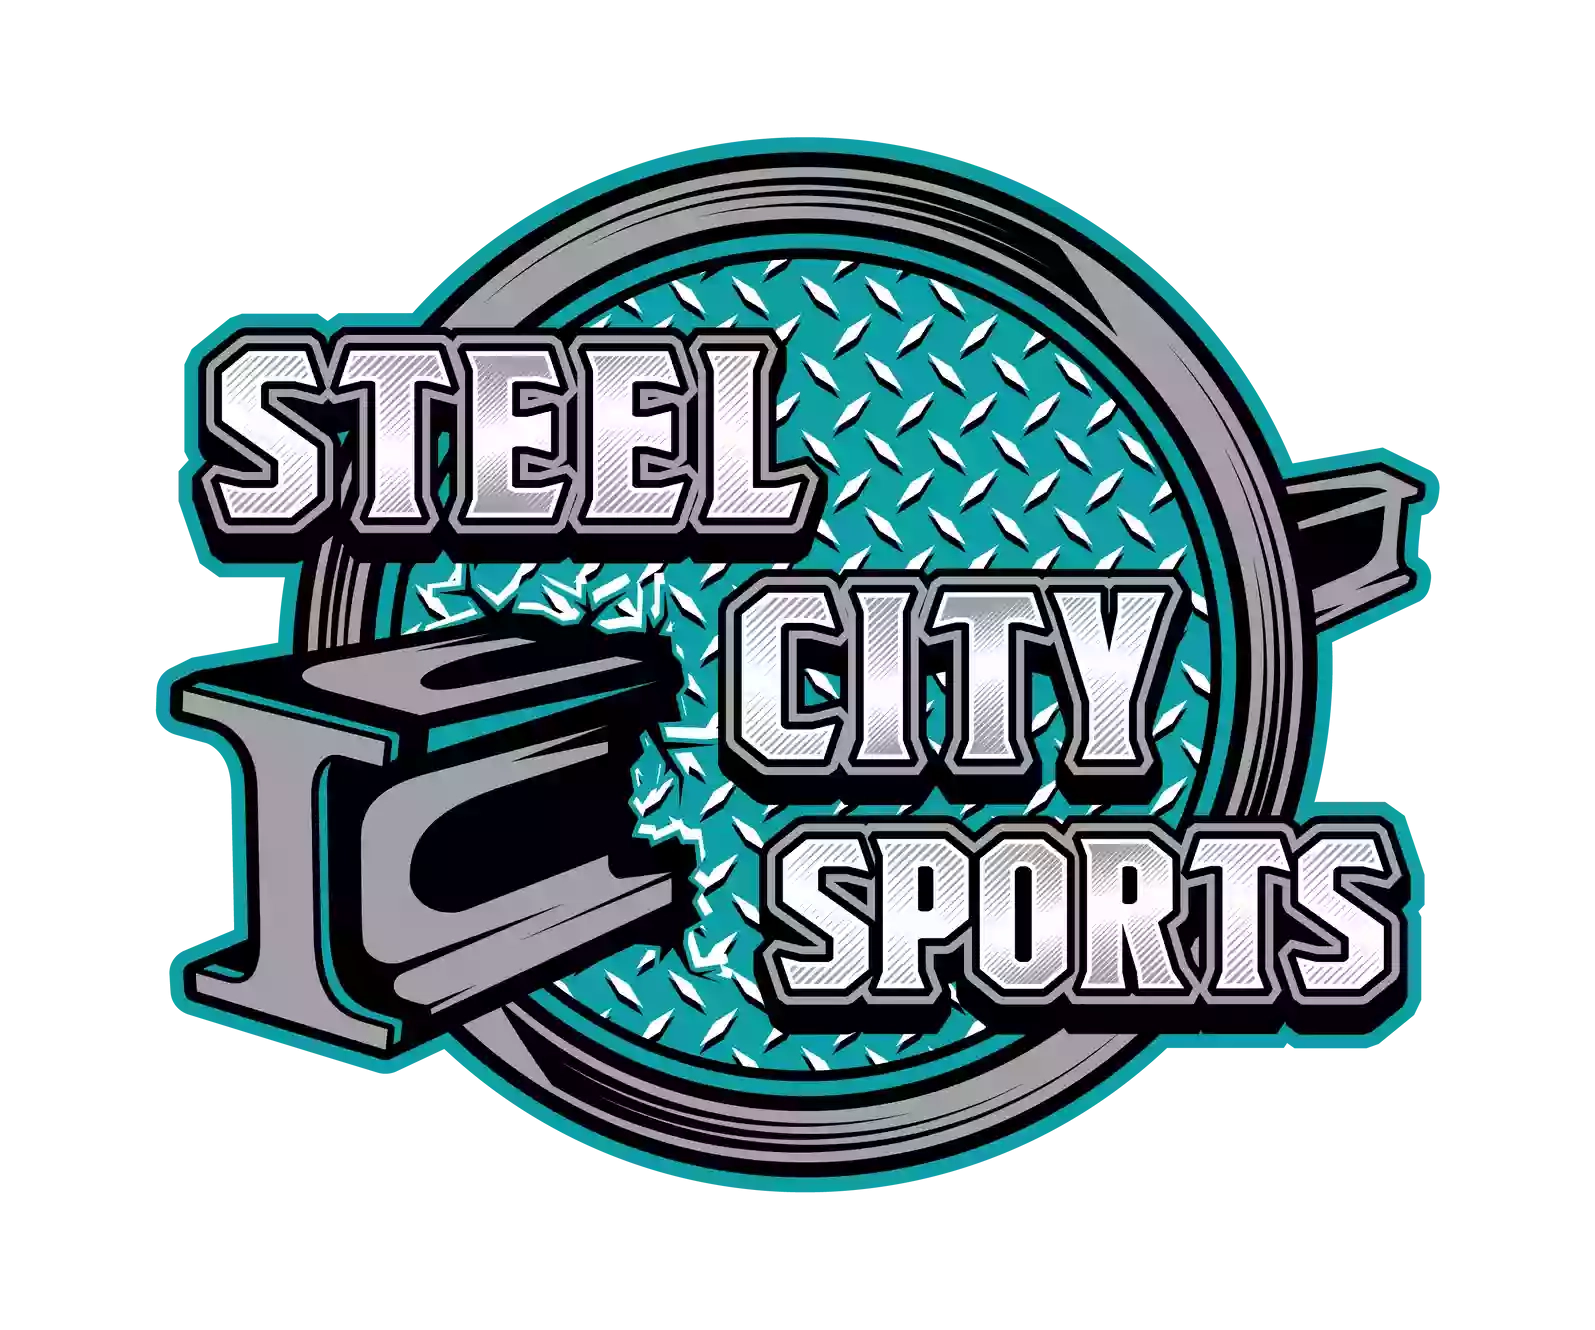 Steel City Sports @ The Forge